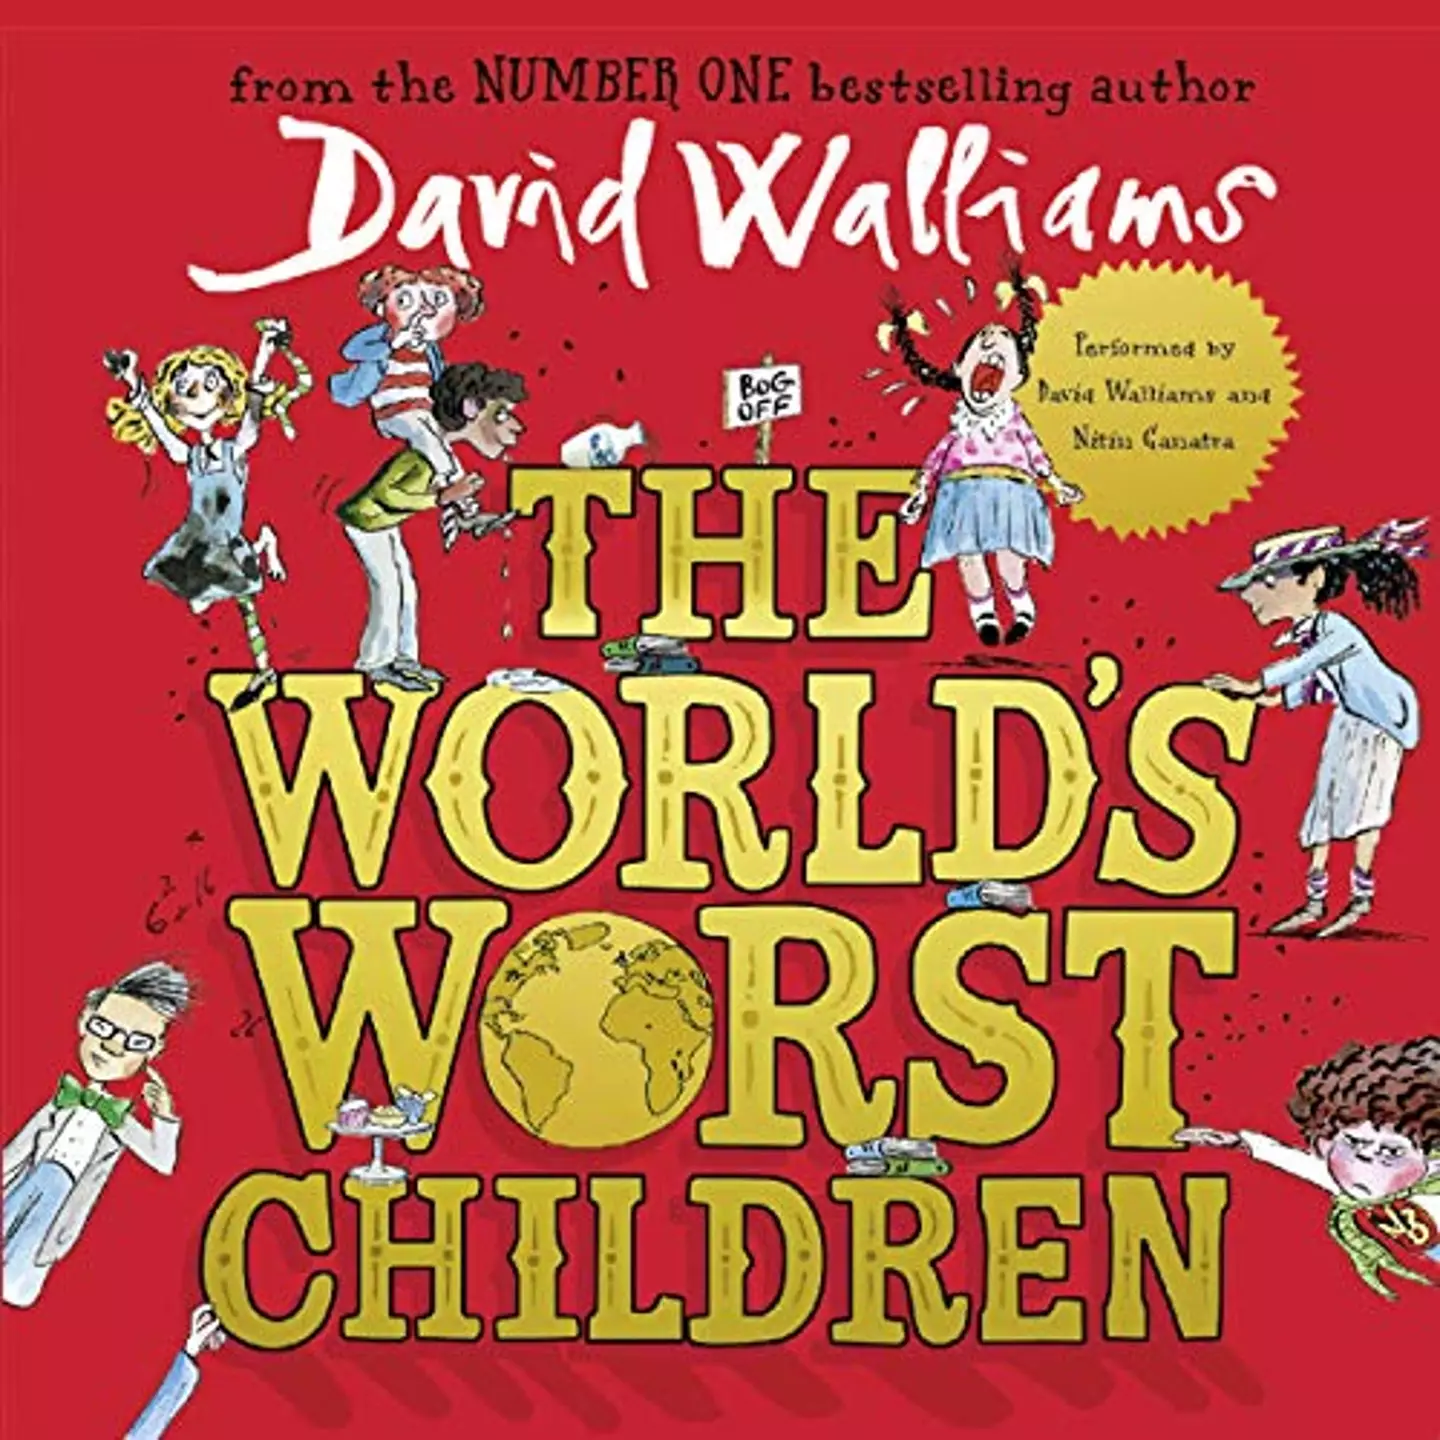 The character appears in World's Worst Children by Walliams (